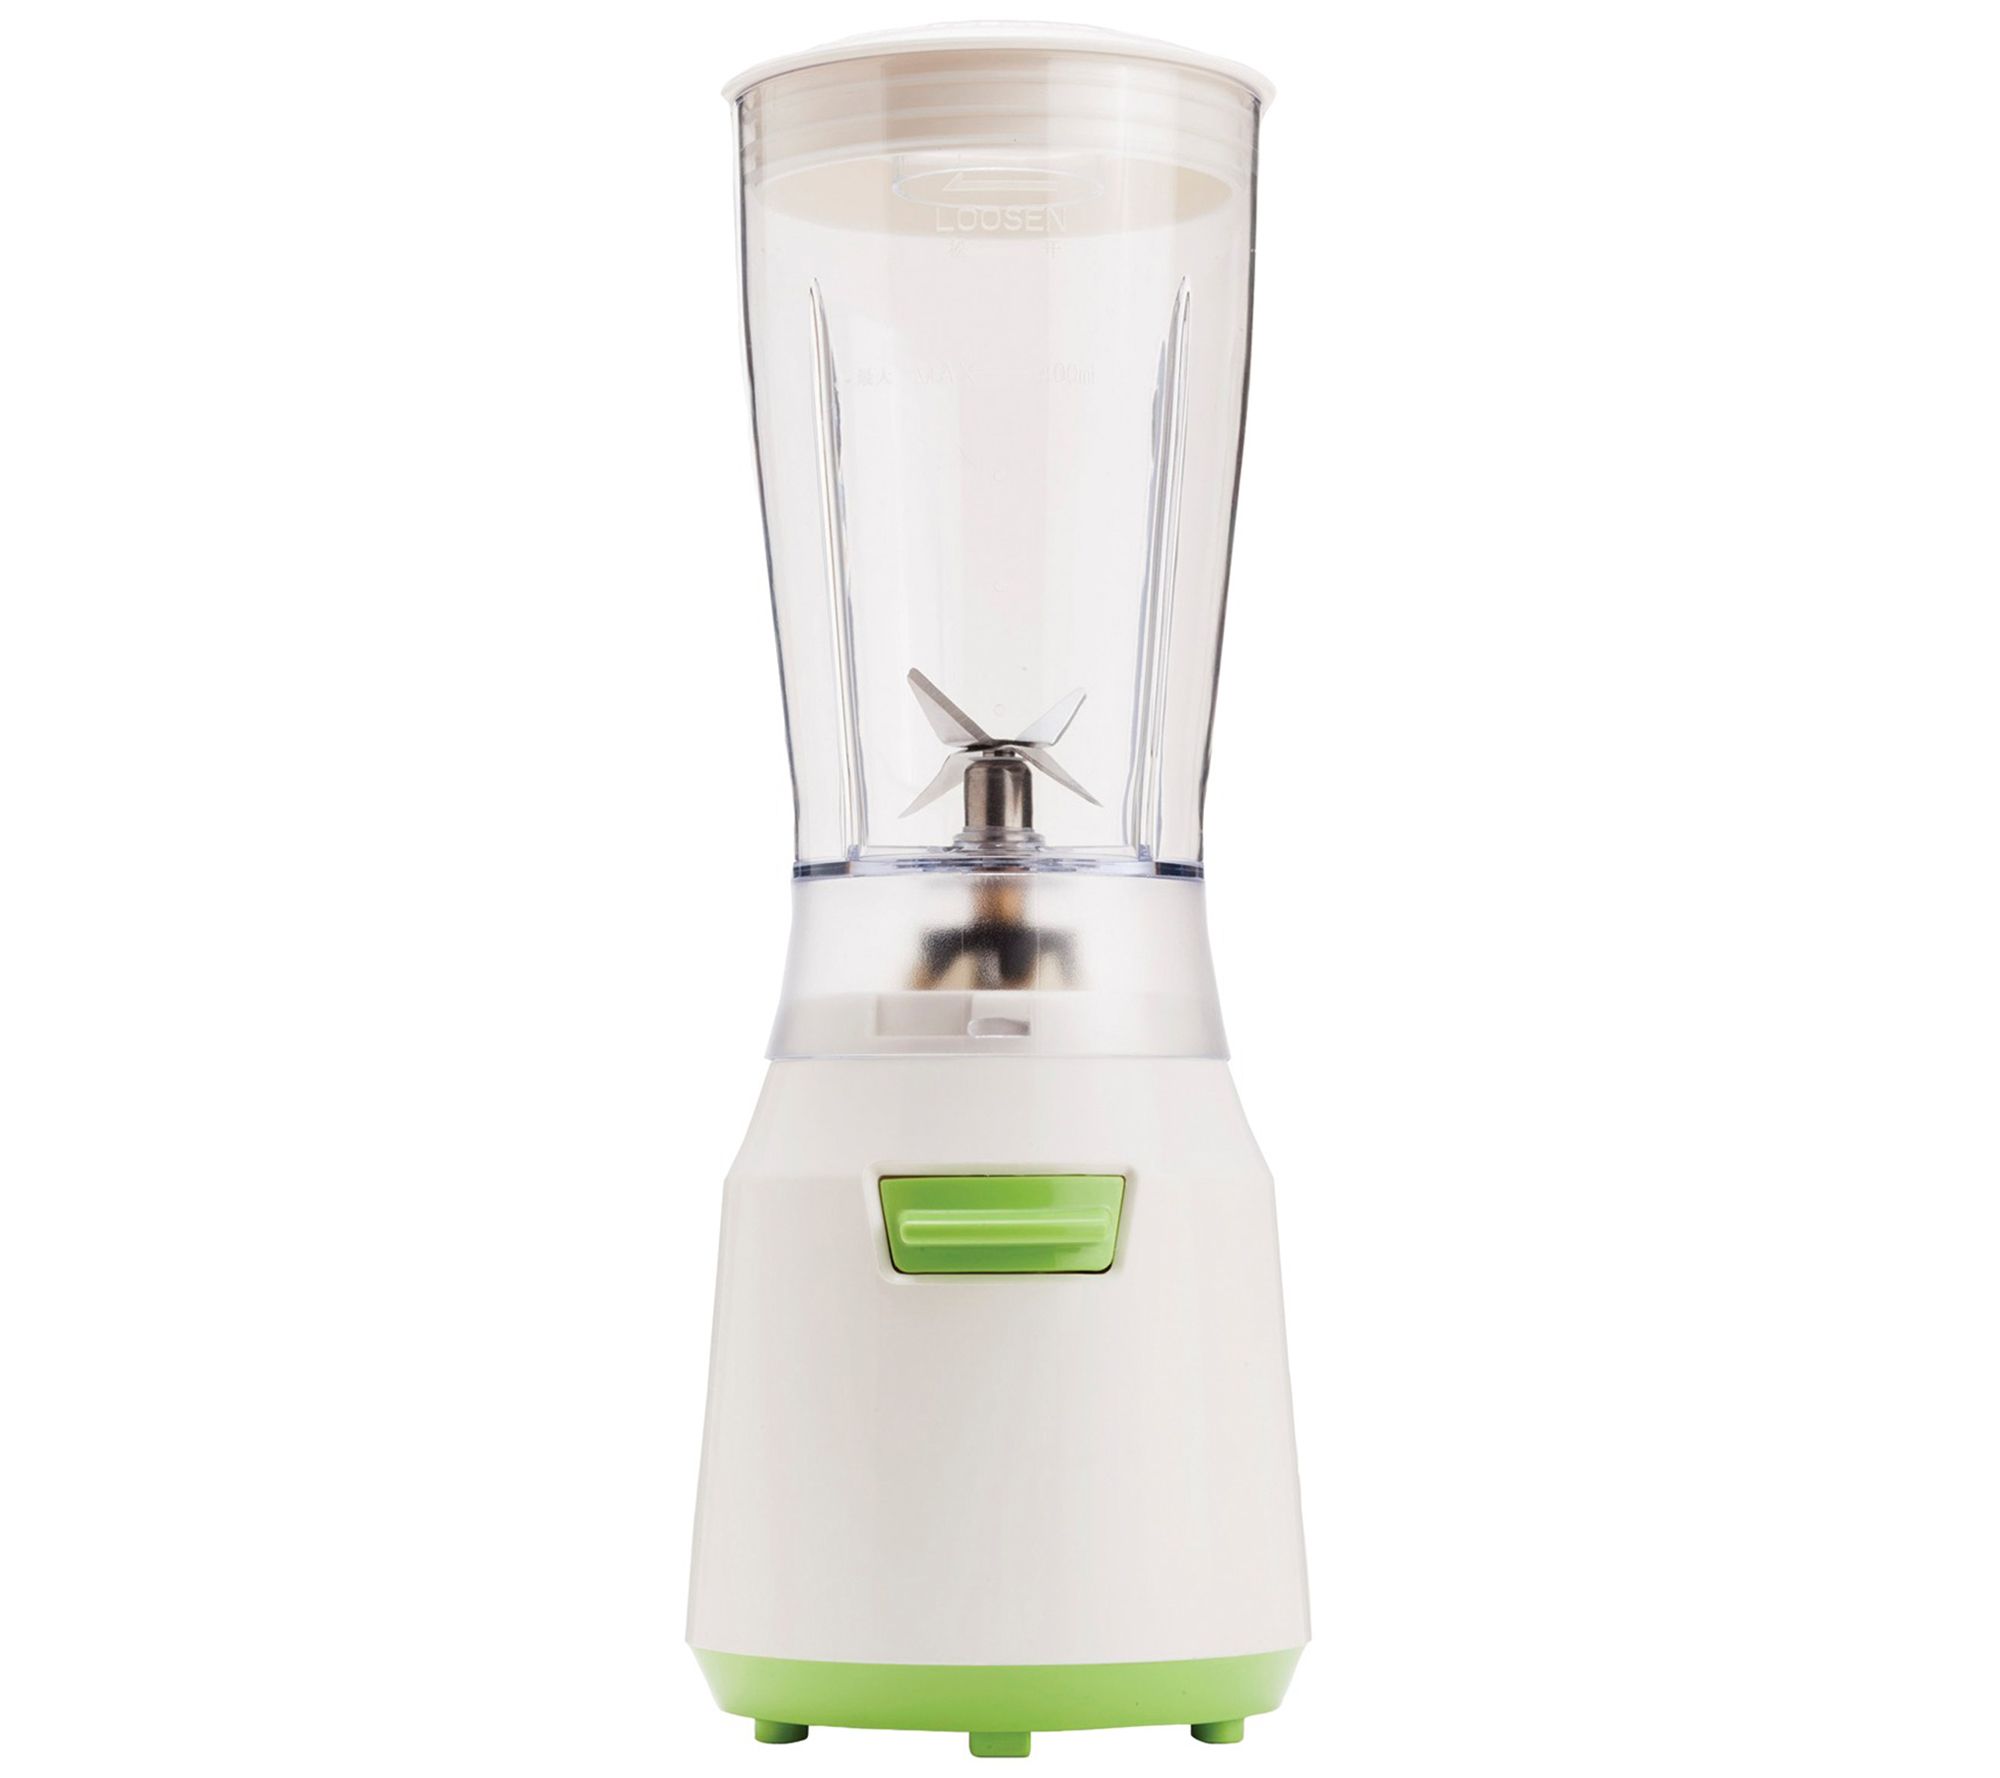 Brentwood Electric Personal Blender